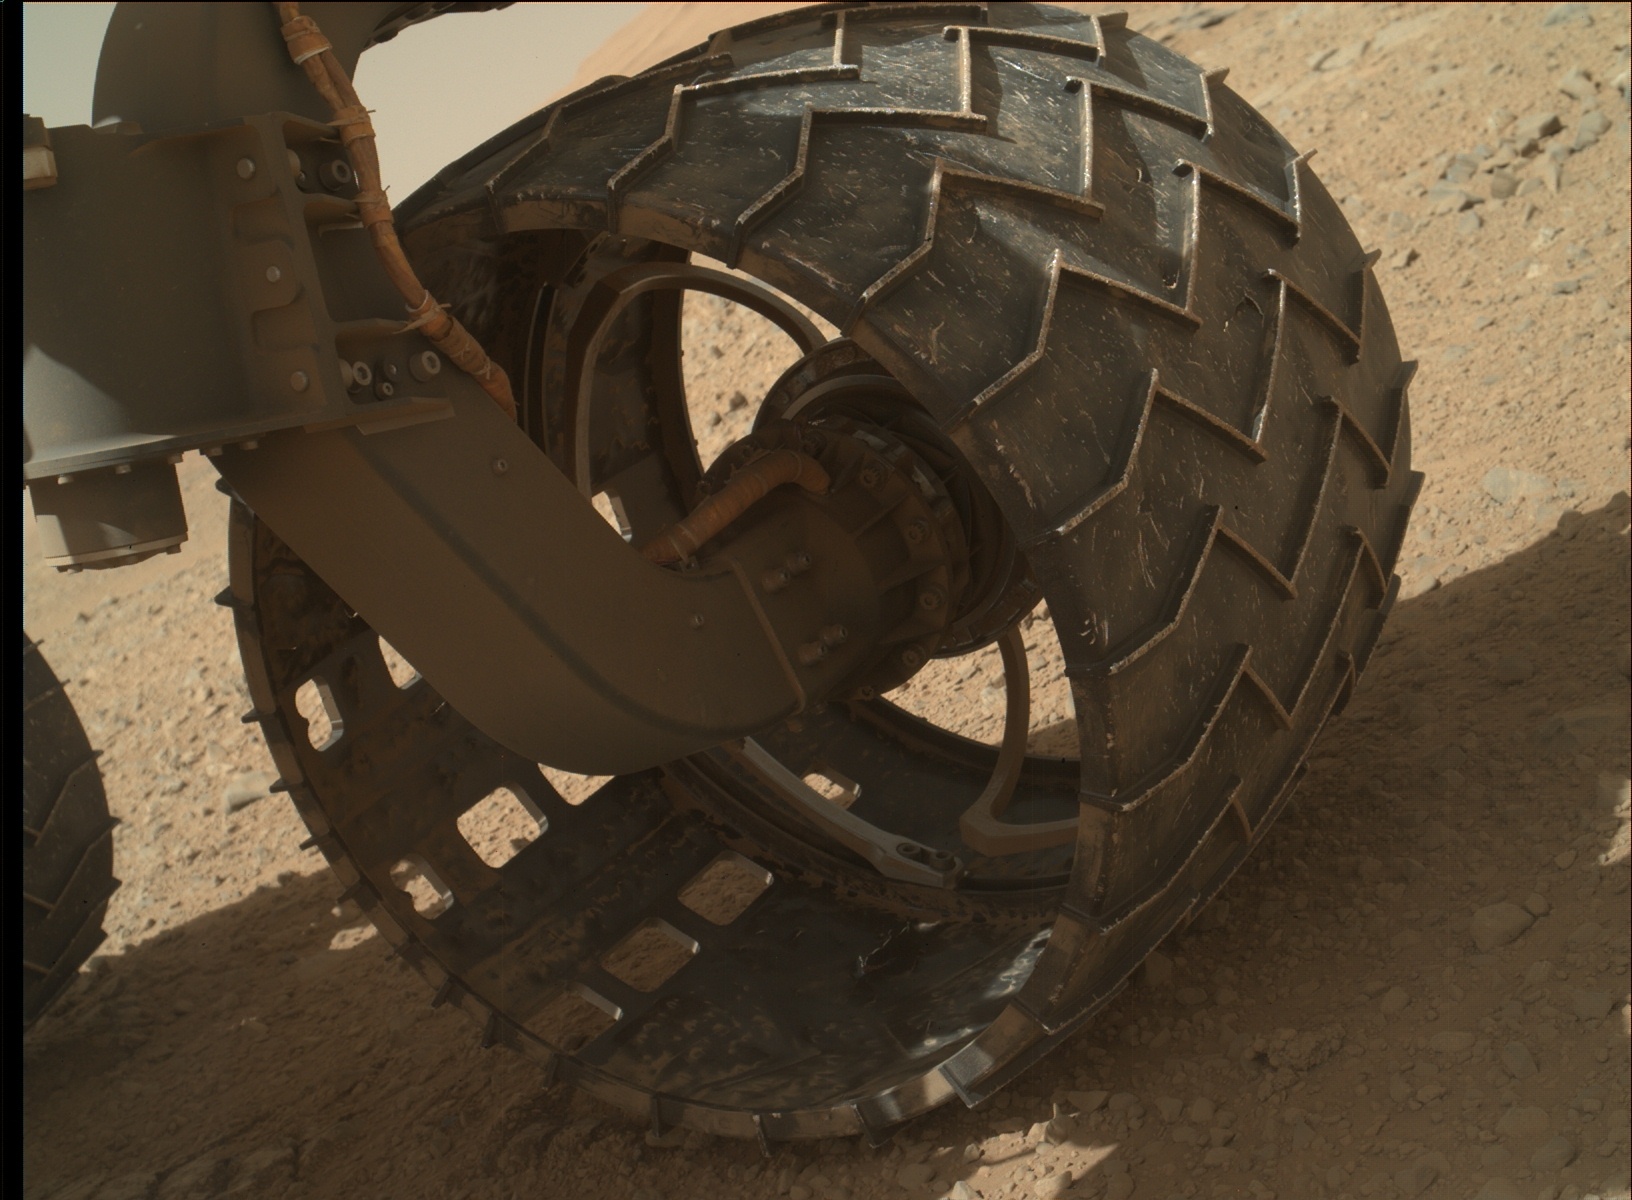 Nasa's Mars rover Curiosity acquired this image using its Mars Hand Lens Imager (MAHLI) on Sol 546